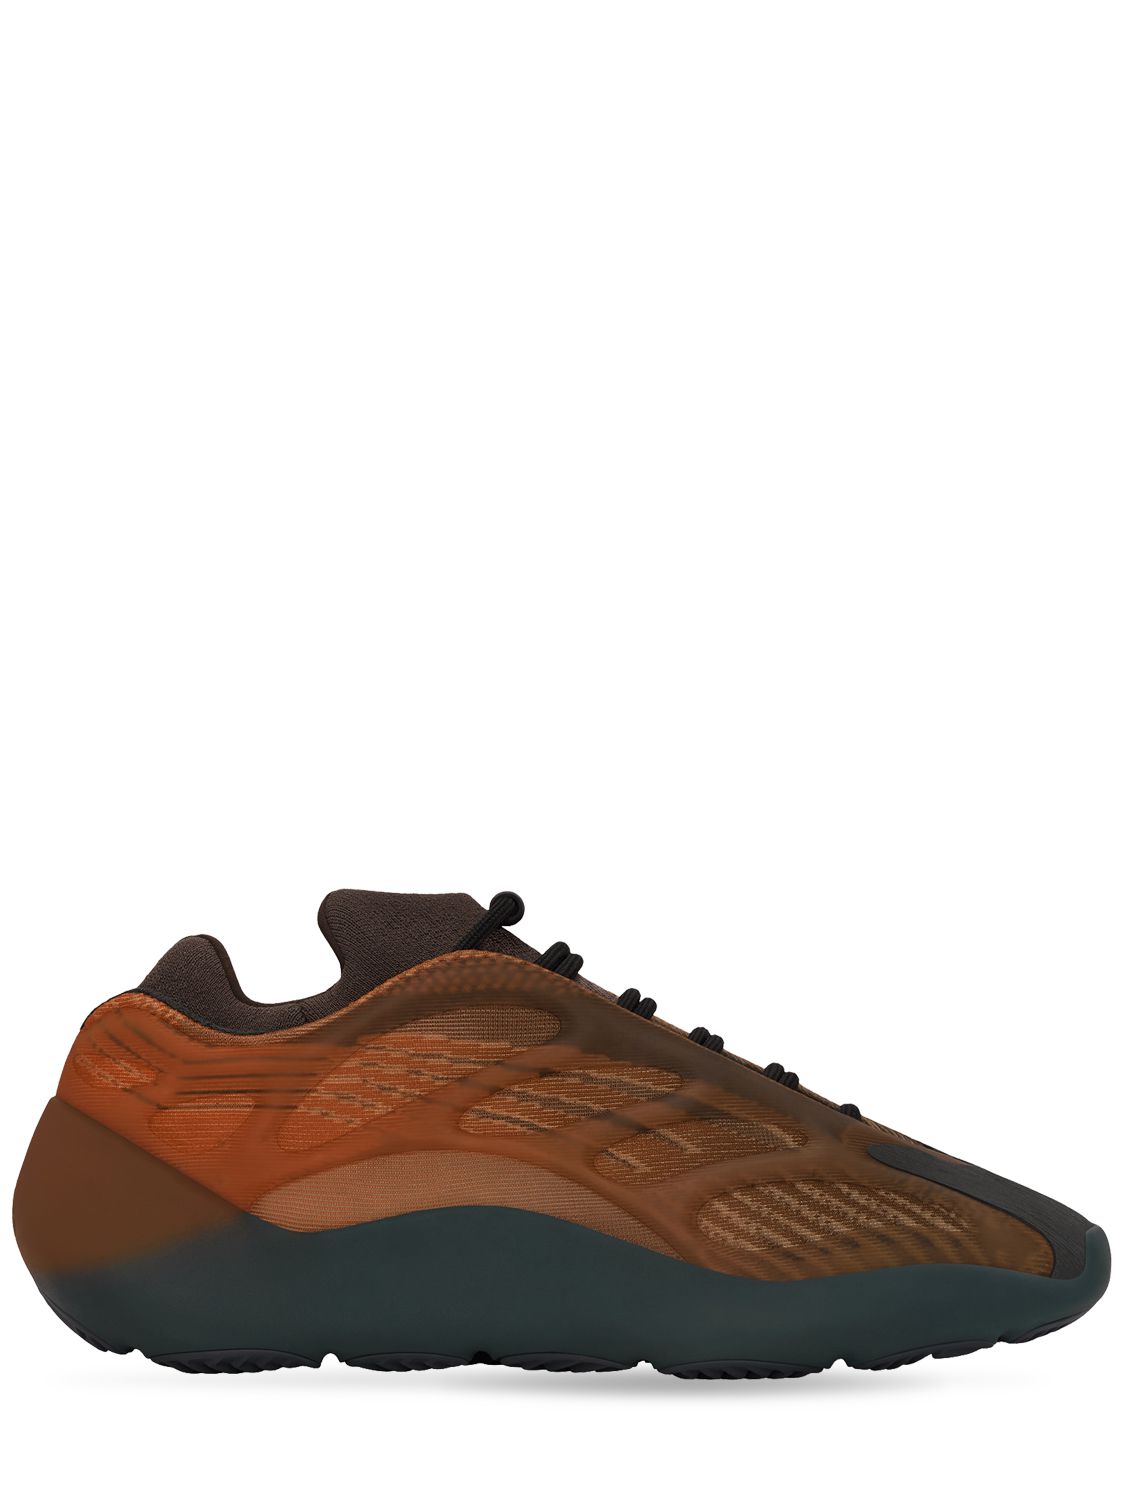 Yeezy Orange 700 V3 Trainers In Copper Fade